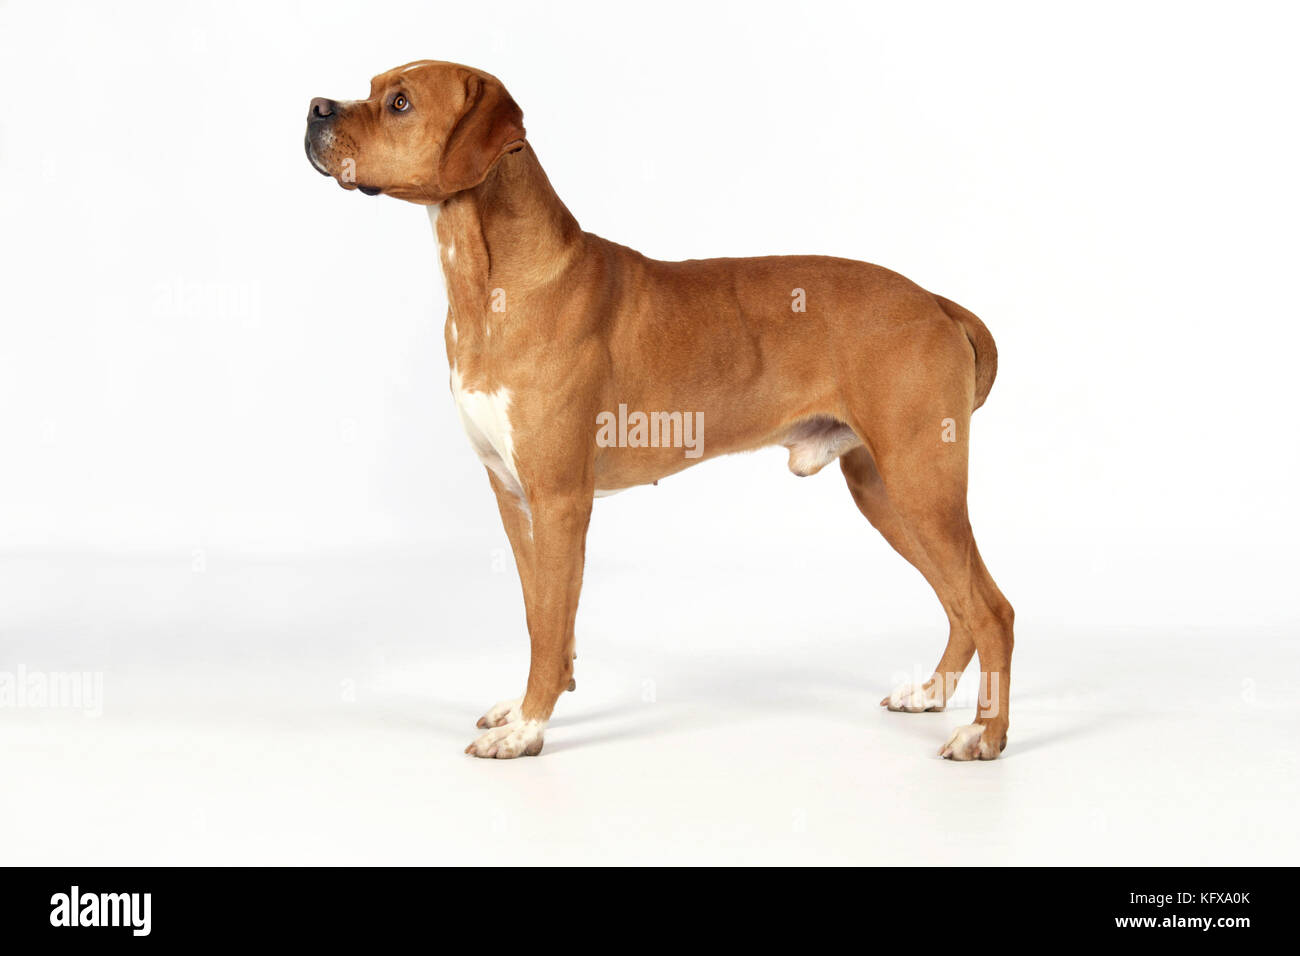 Portuguese Pointer Dog High Resolution Stock Photography and Images - Alamy